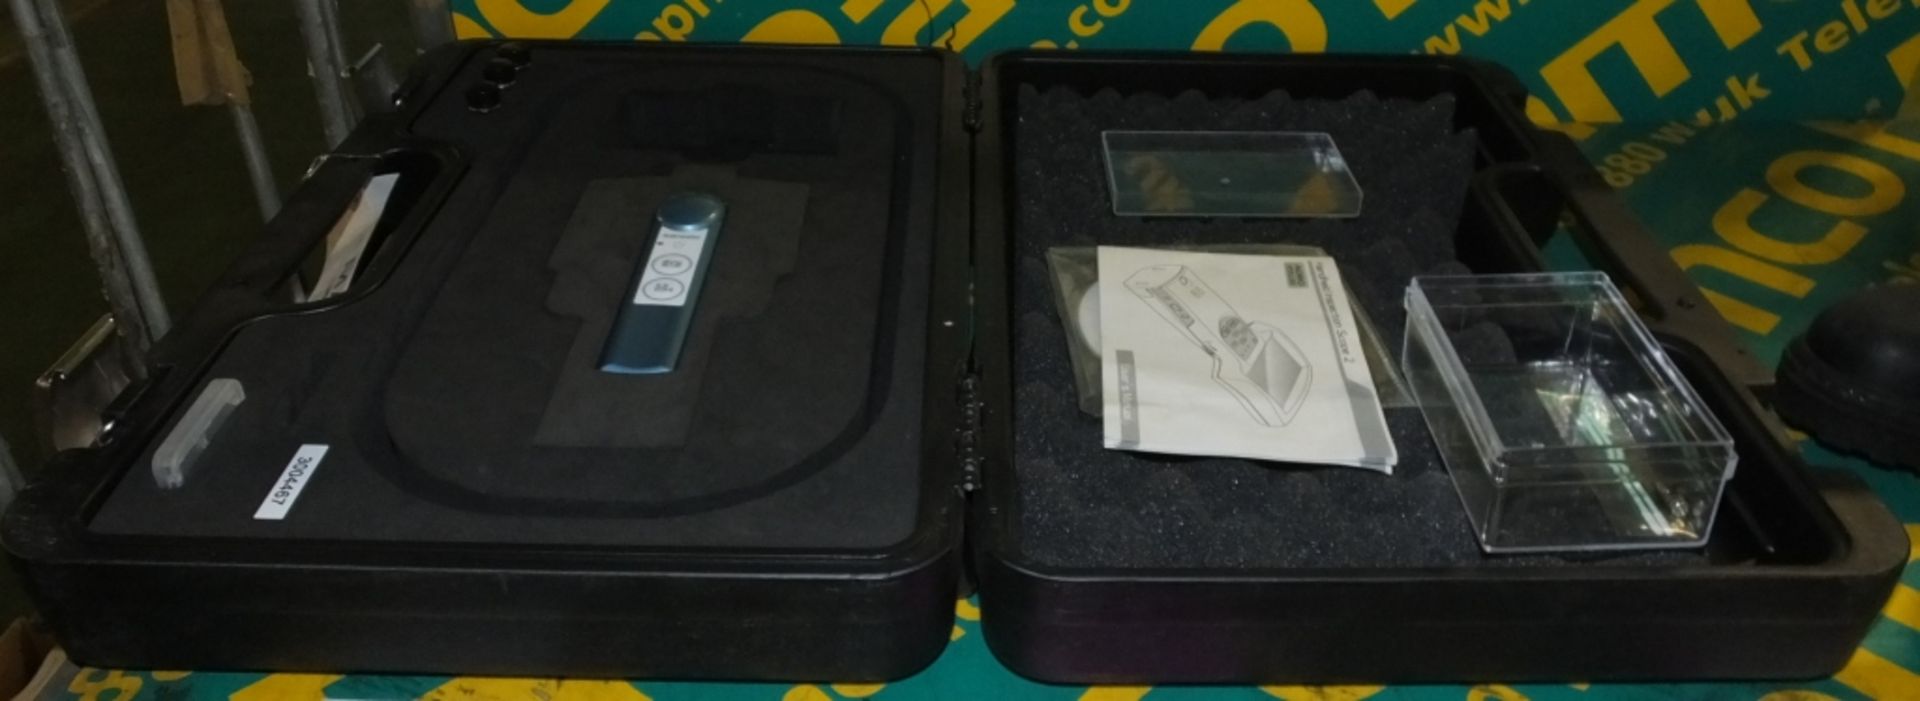 Adrolook USB Recorder Endoskope - incomplete in carry case